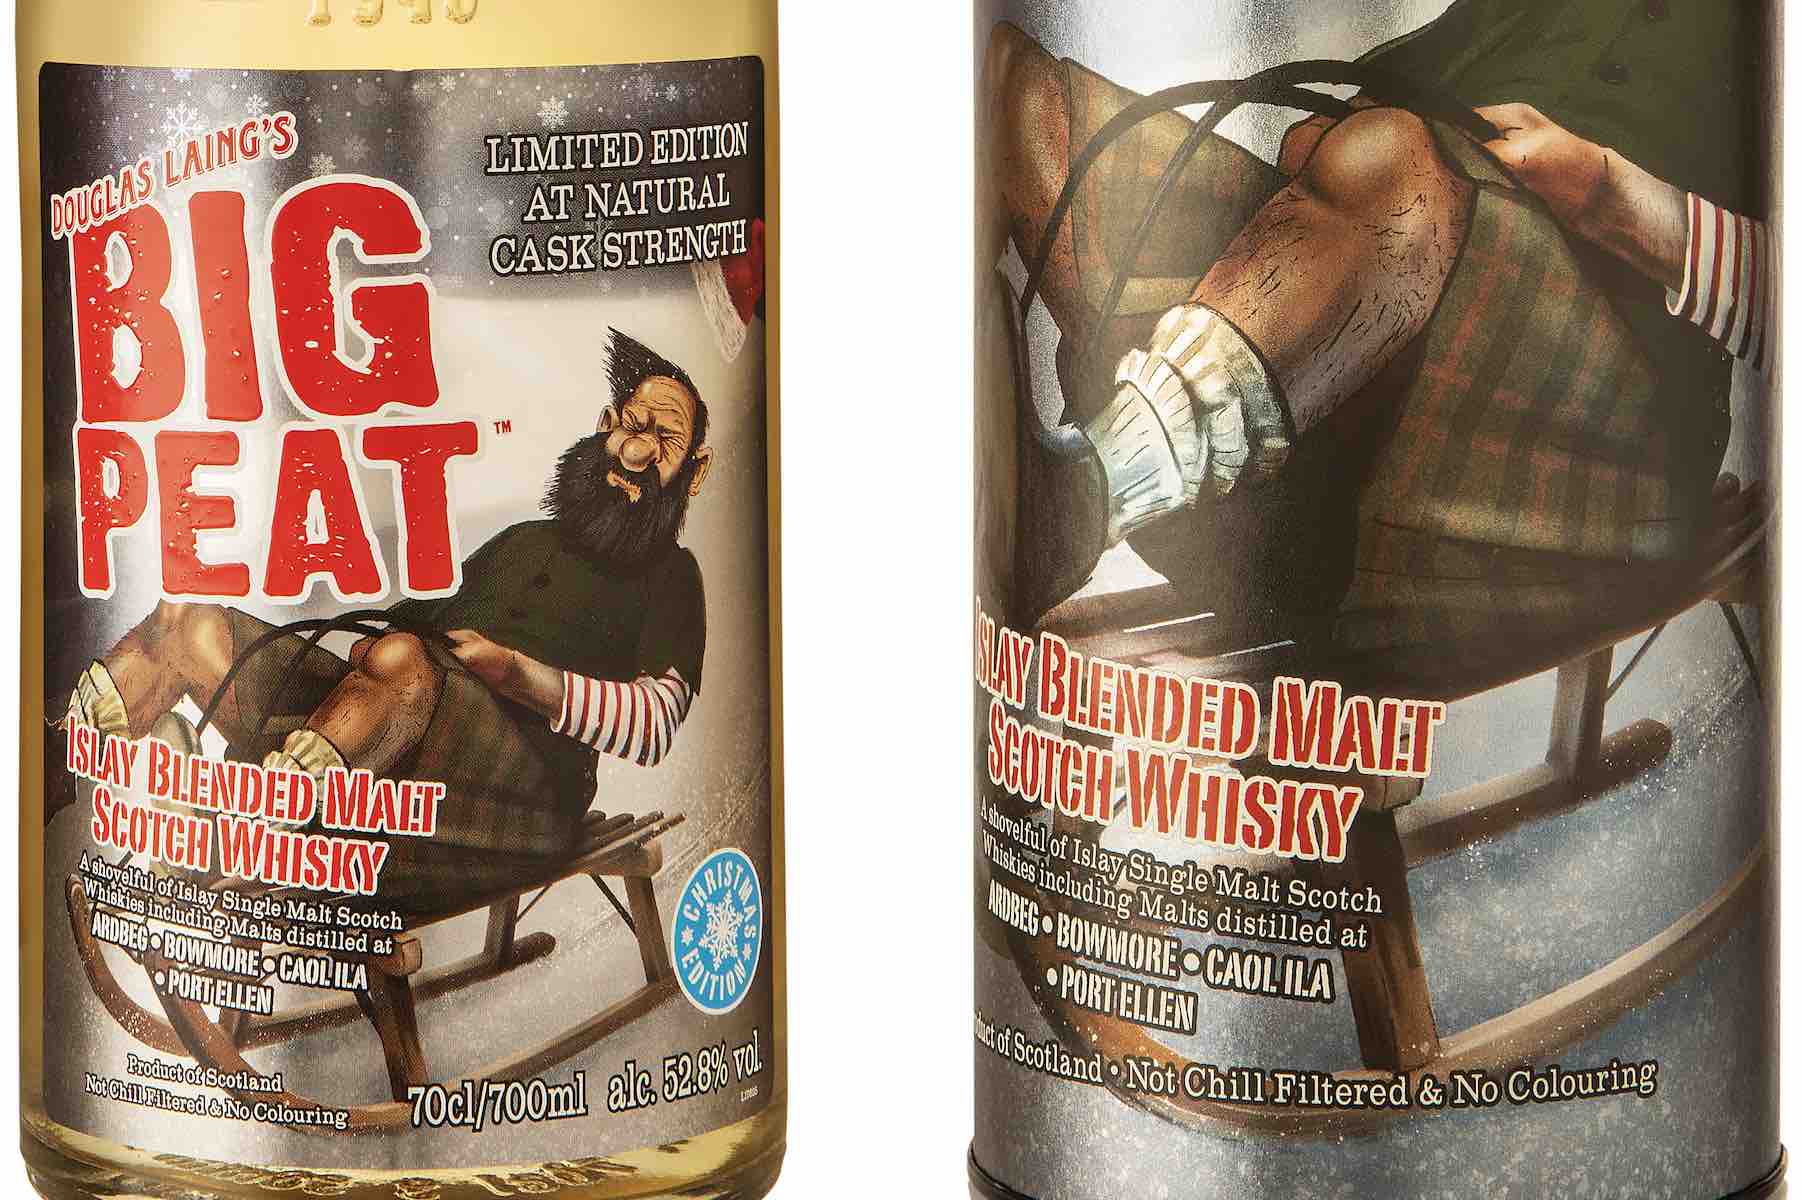 Big Peat Christmas 2021 Limited Edition at Cask Strength